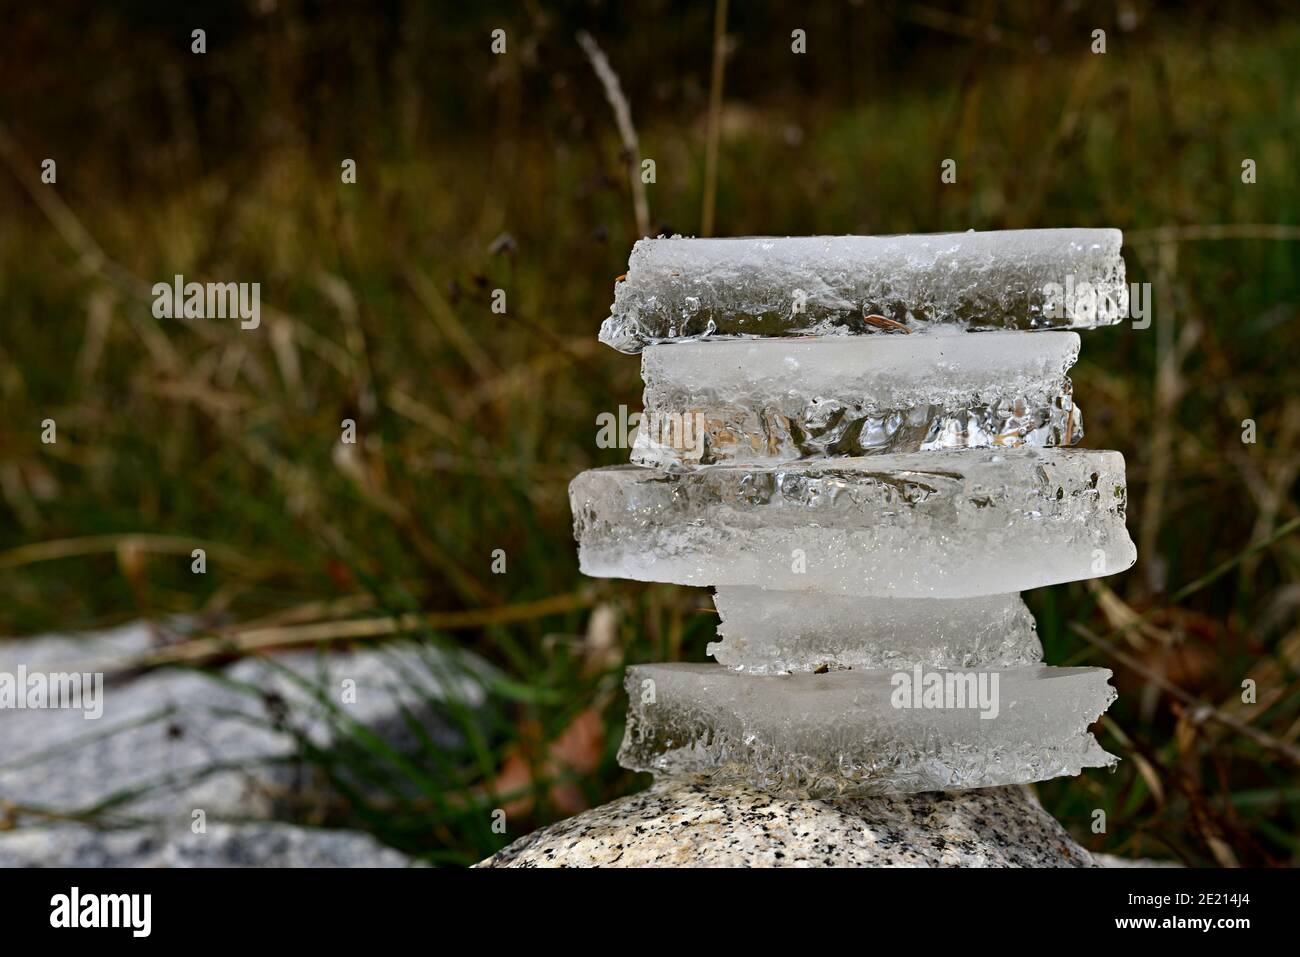 Ice stacked on top of each other. Balancing ice pieces into an mound. Pieces of ice stacked on a large boulder with winter green-brown grass in the ba Stock Photo